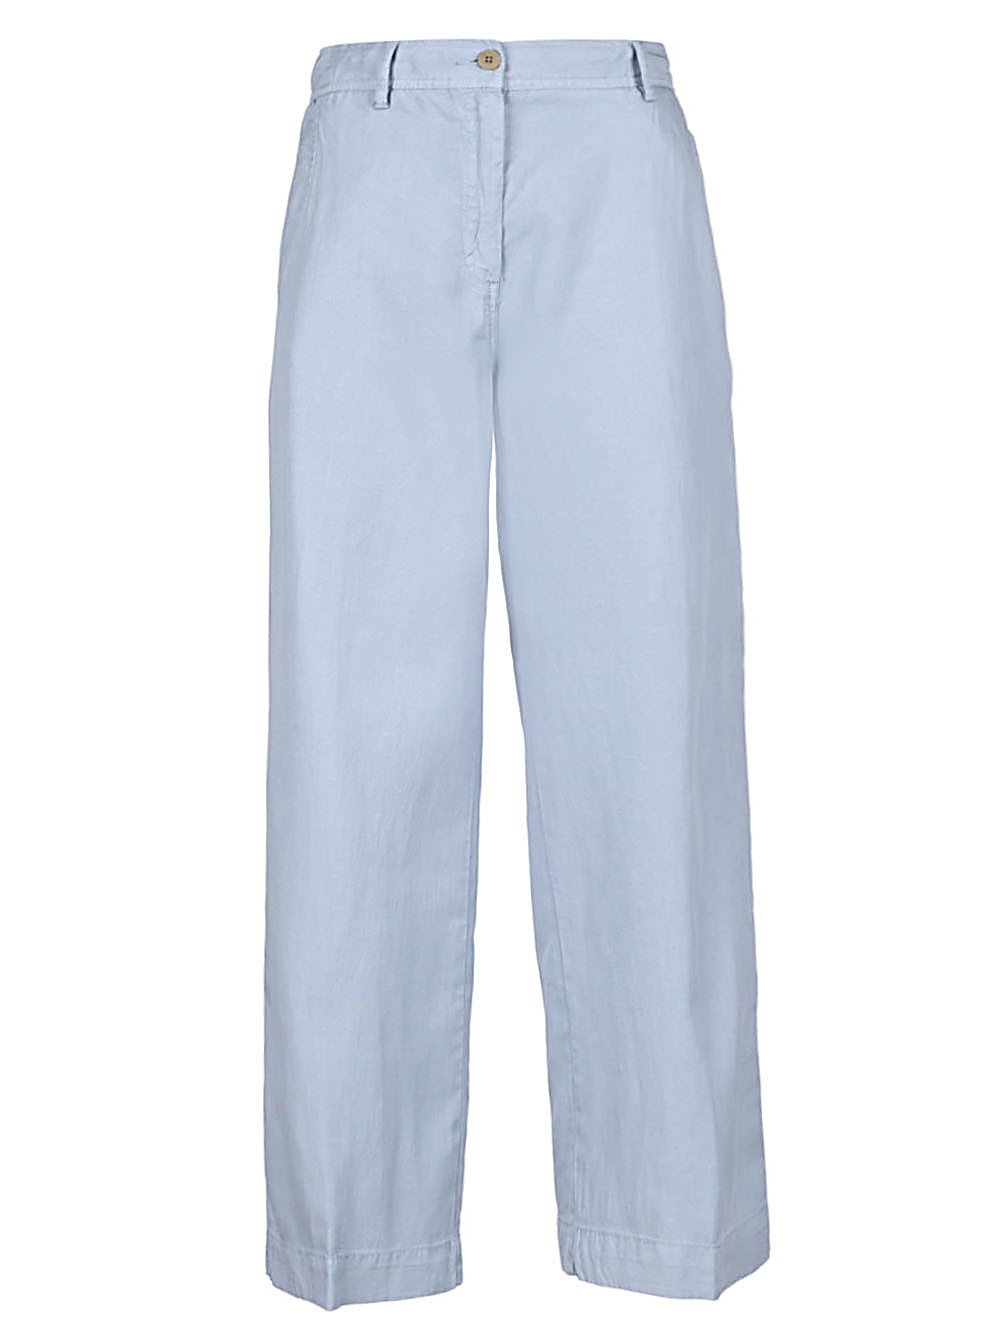 SKILLS&GENES - Cropped Trousers